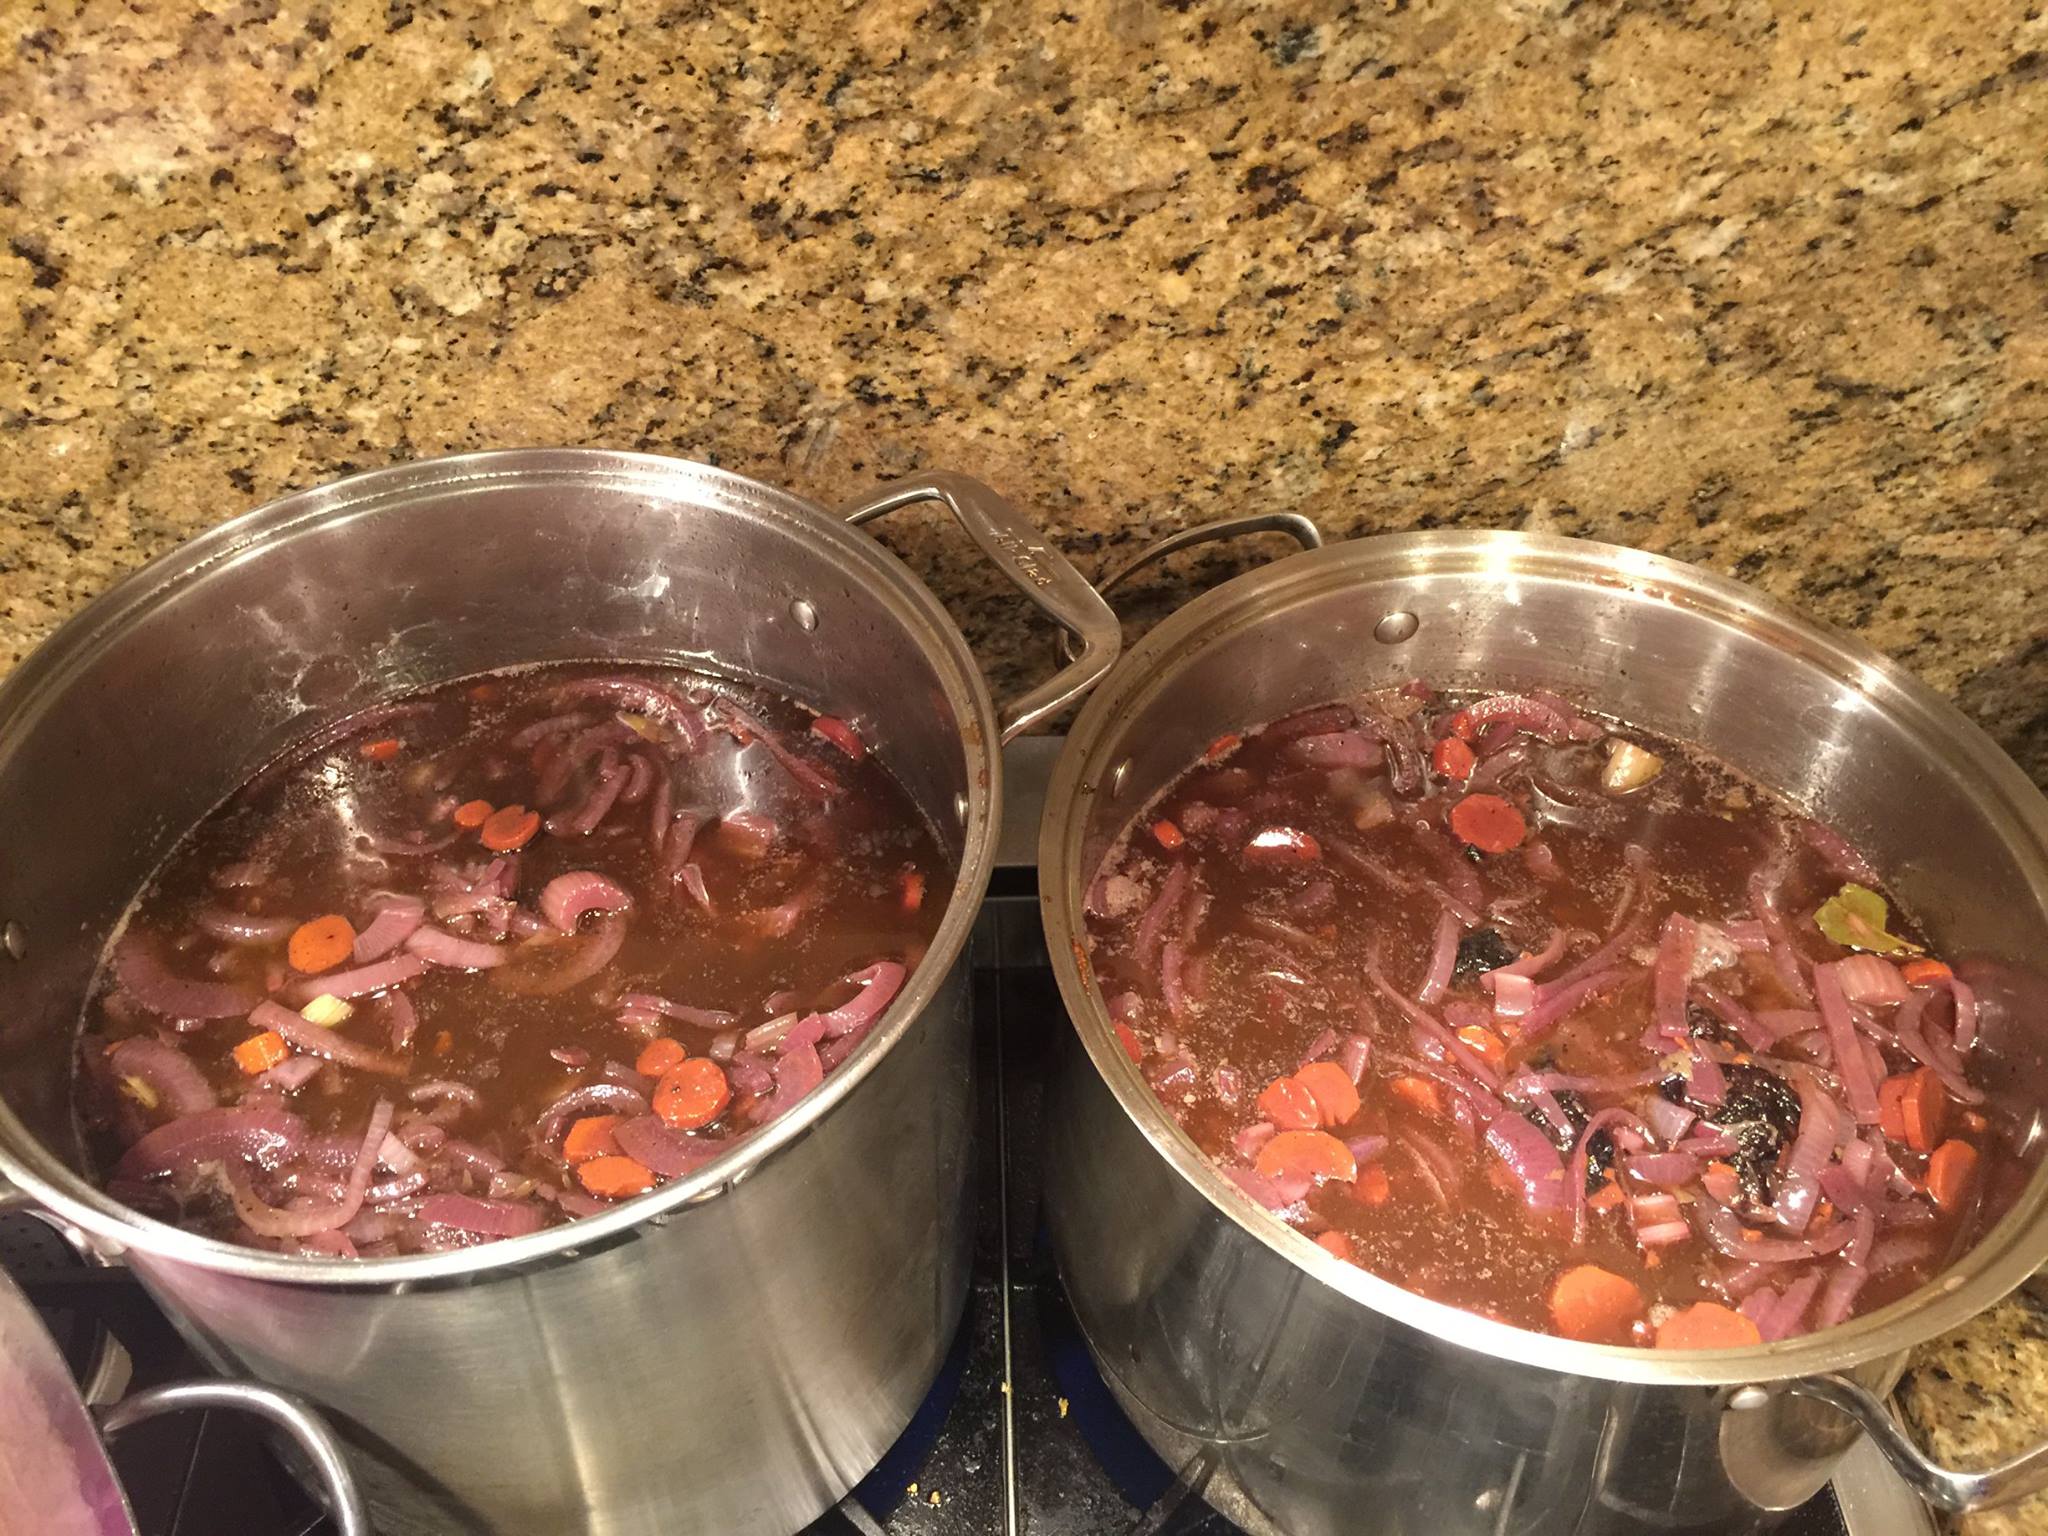 20 pounds of sauerbraten in the making (part 3)